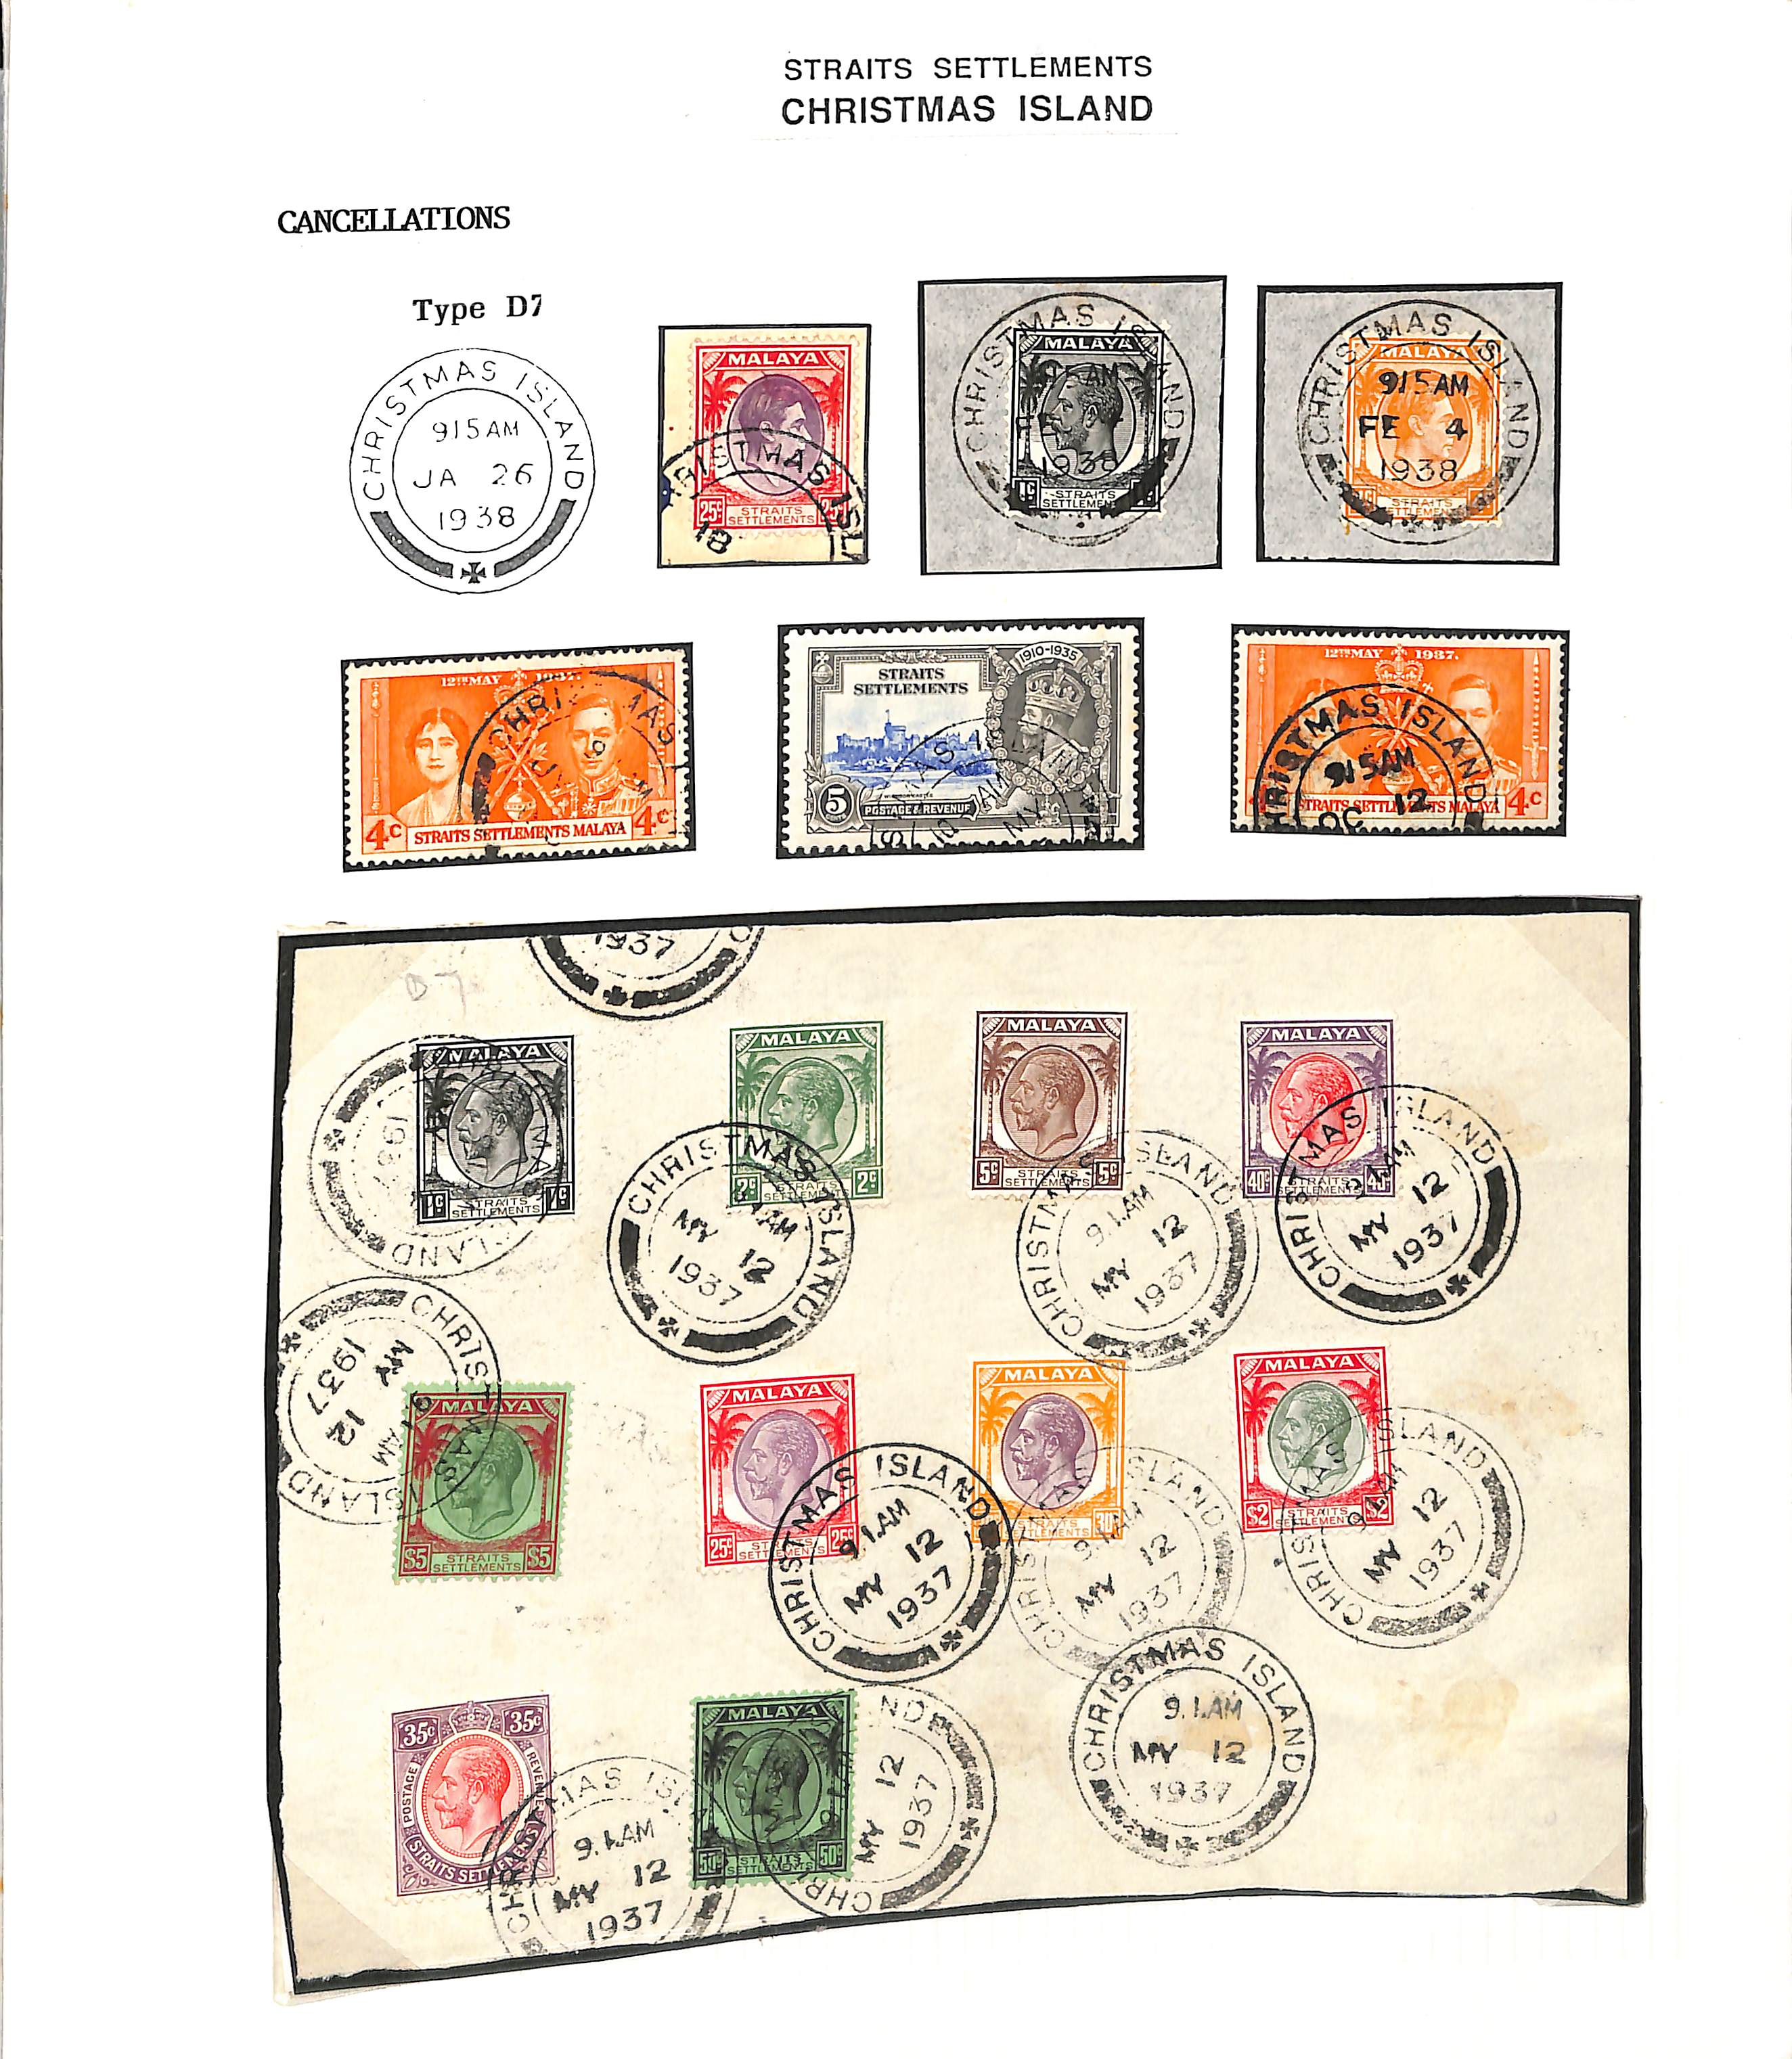 1937-38 Pieces (4) and stamps (3) with "CHRISTMAS ISLAND" c.d.s type D7, one large piece with KGV